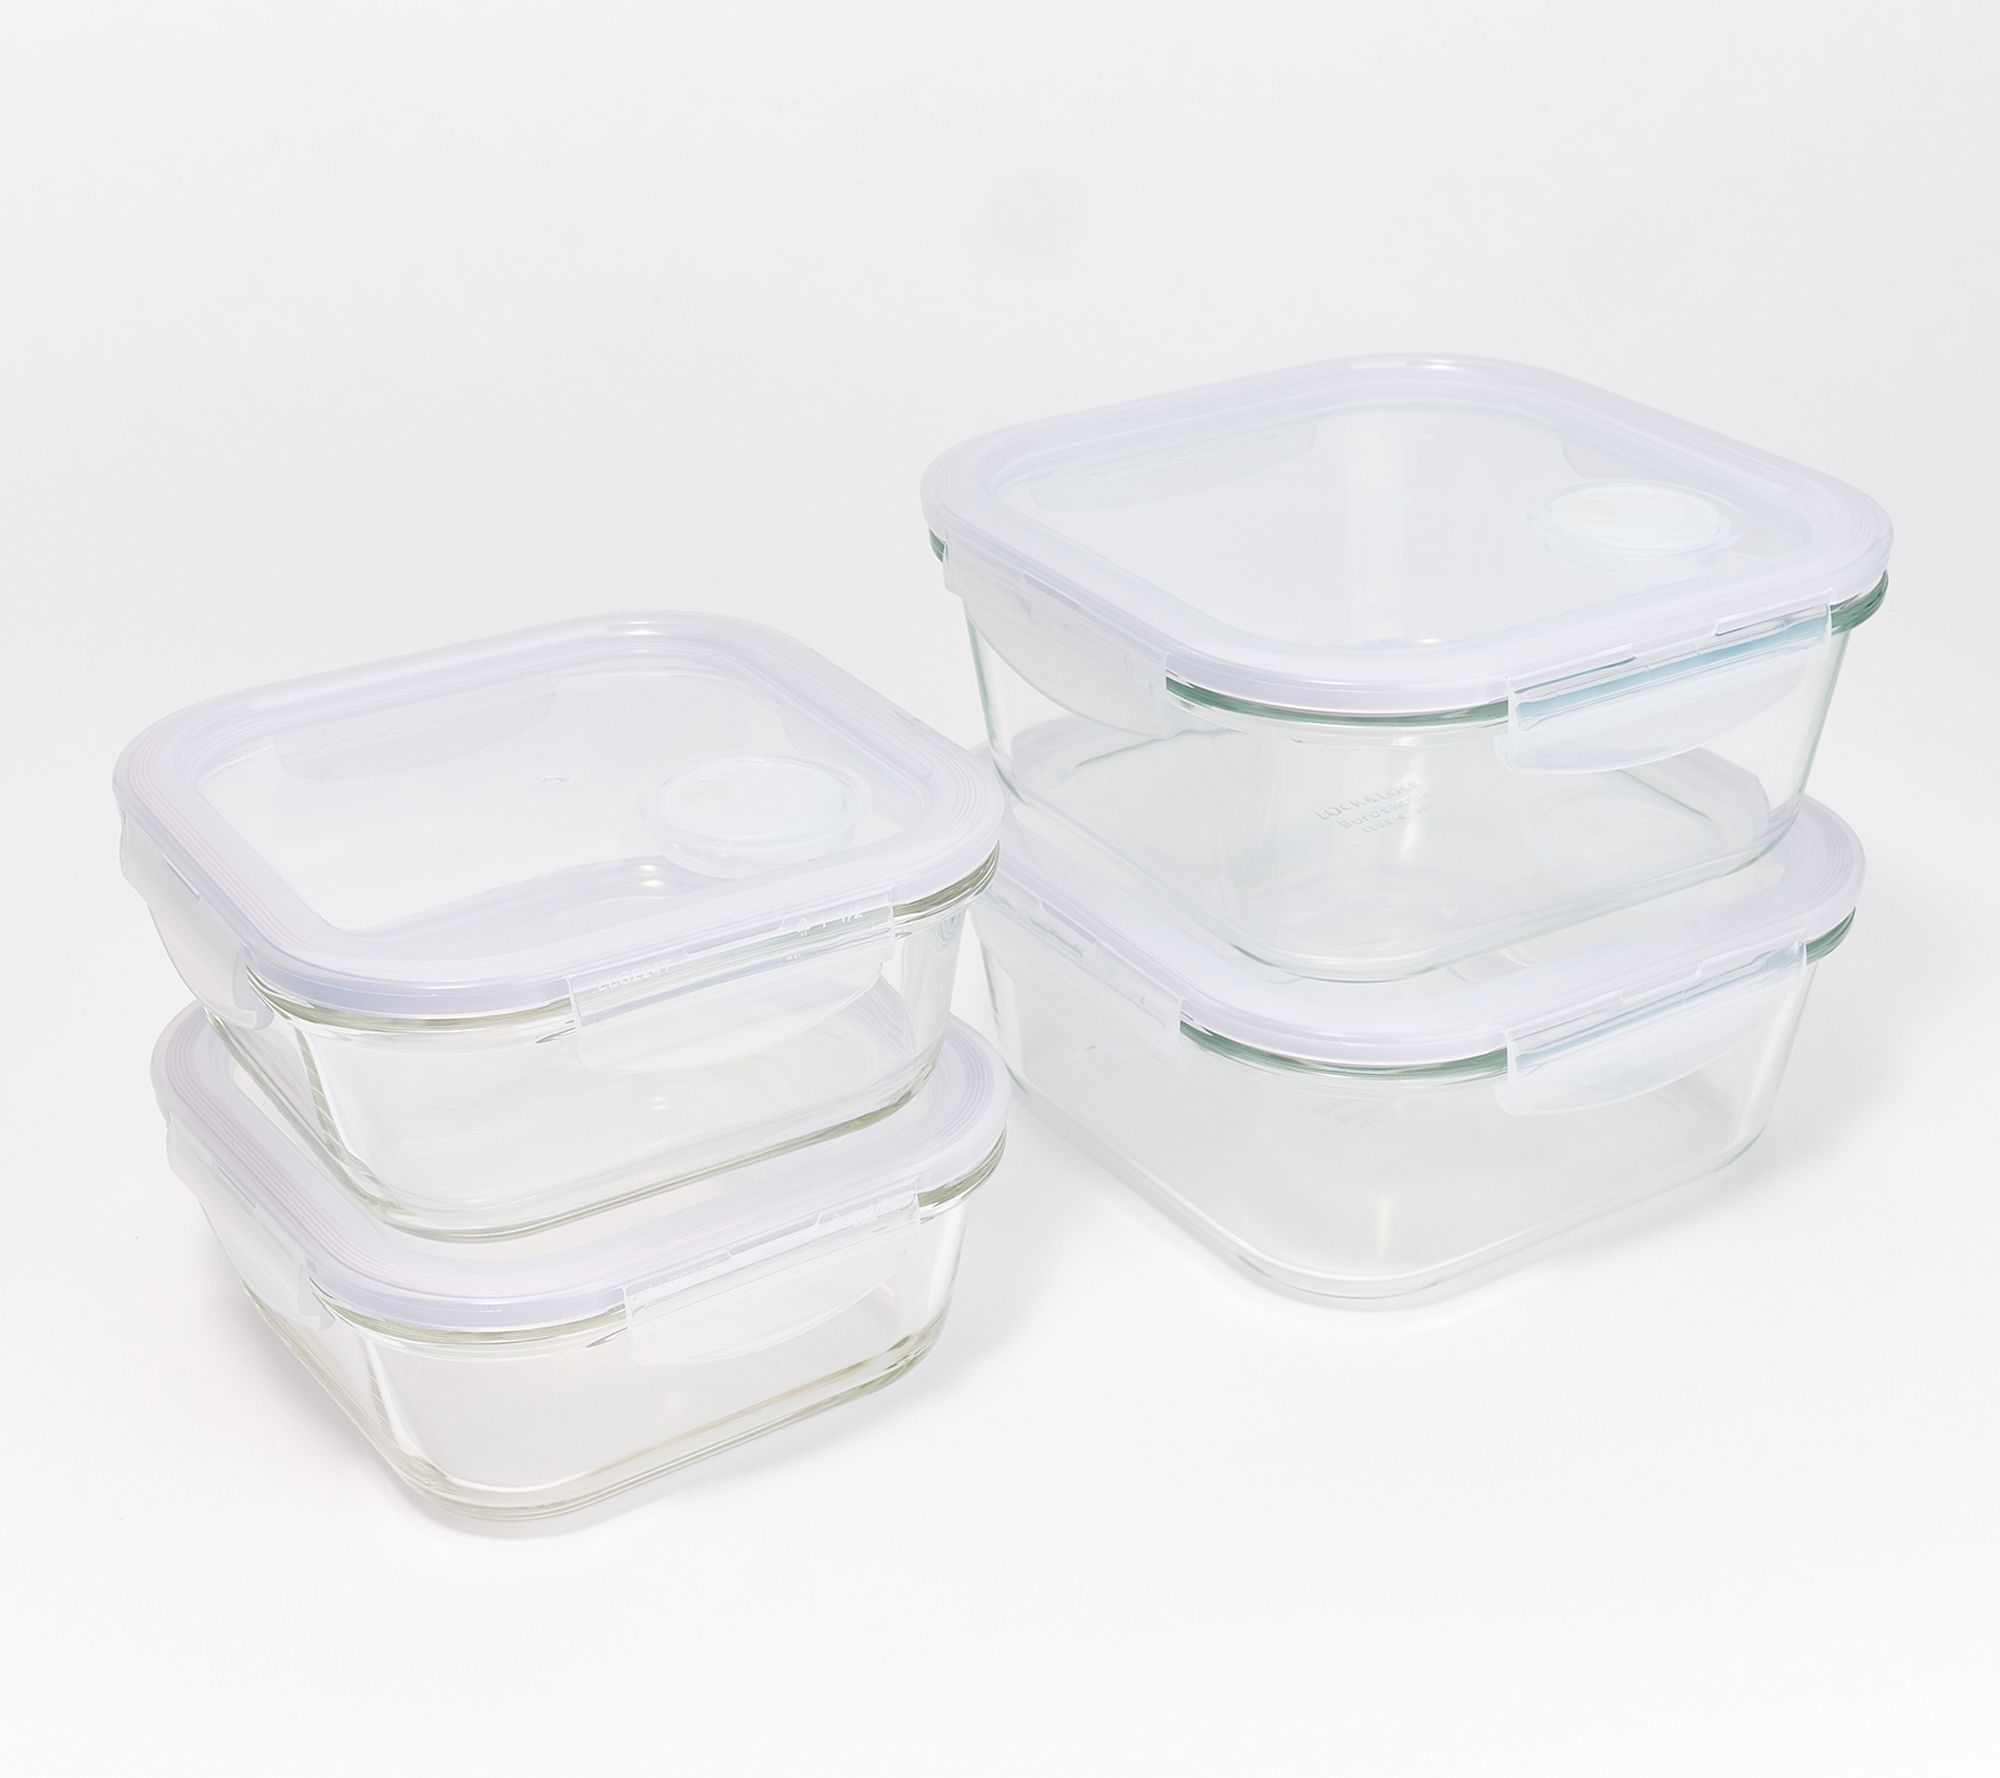 1 Cup 4pk Round Glass Food Storage Container Set Light Gray - Room